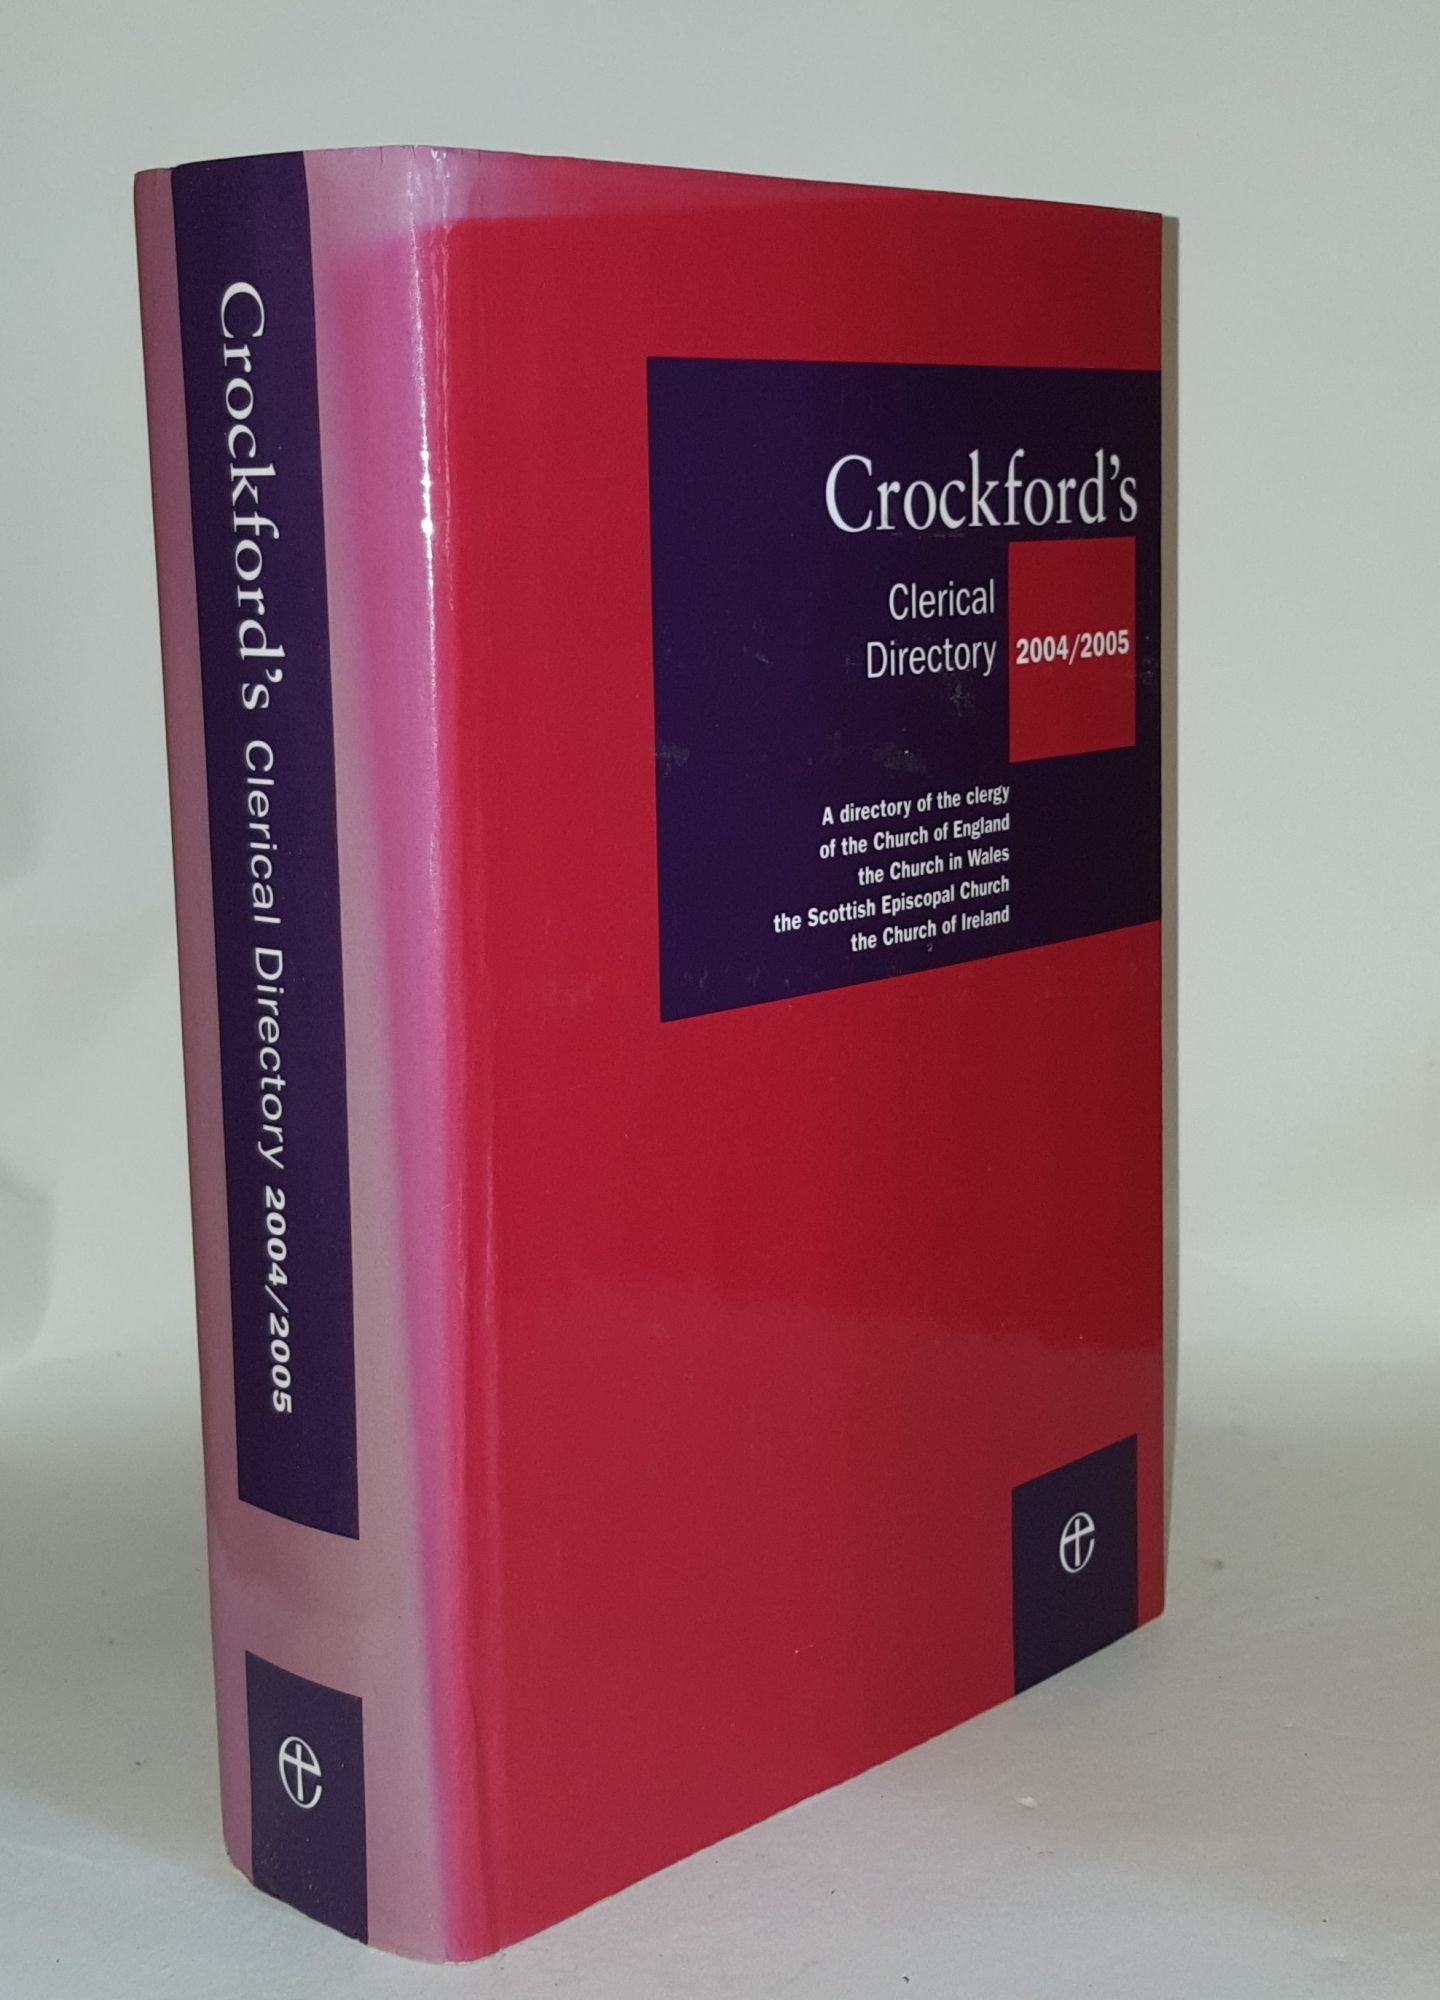 Anon - Crockford's Clerical Directory 2004-2005